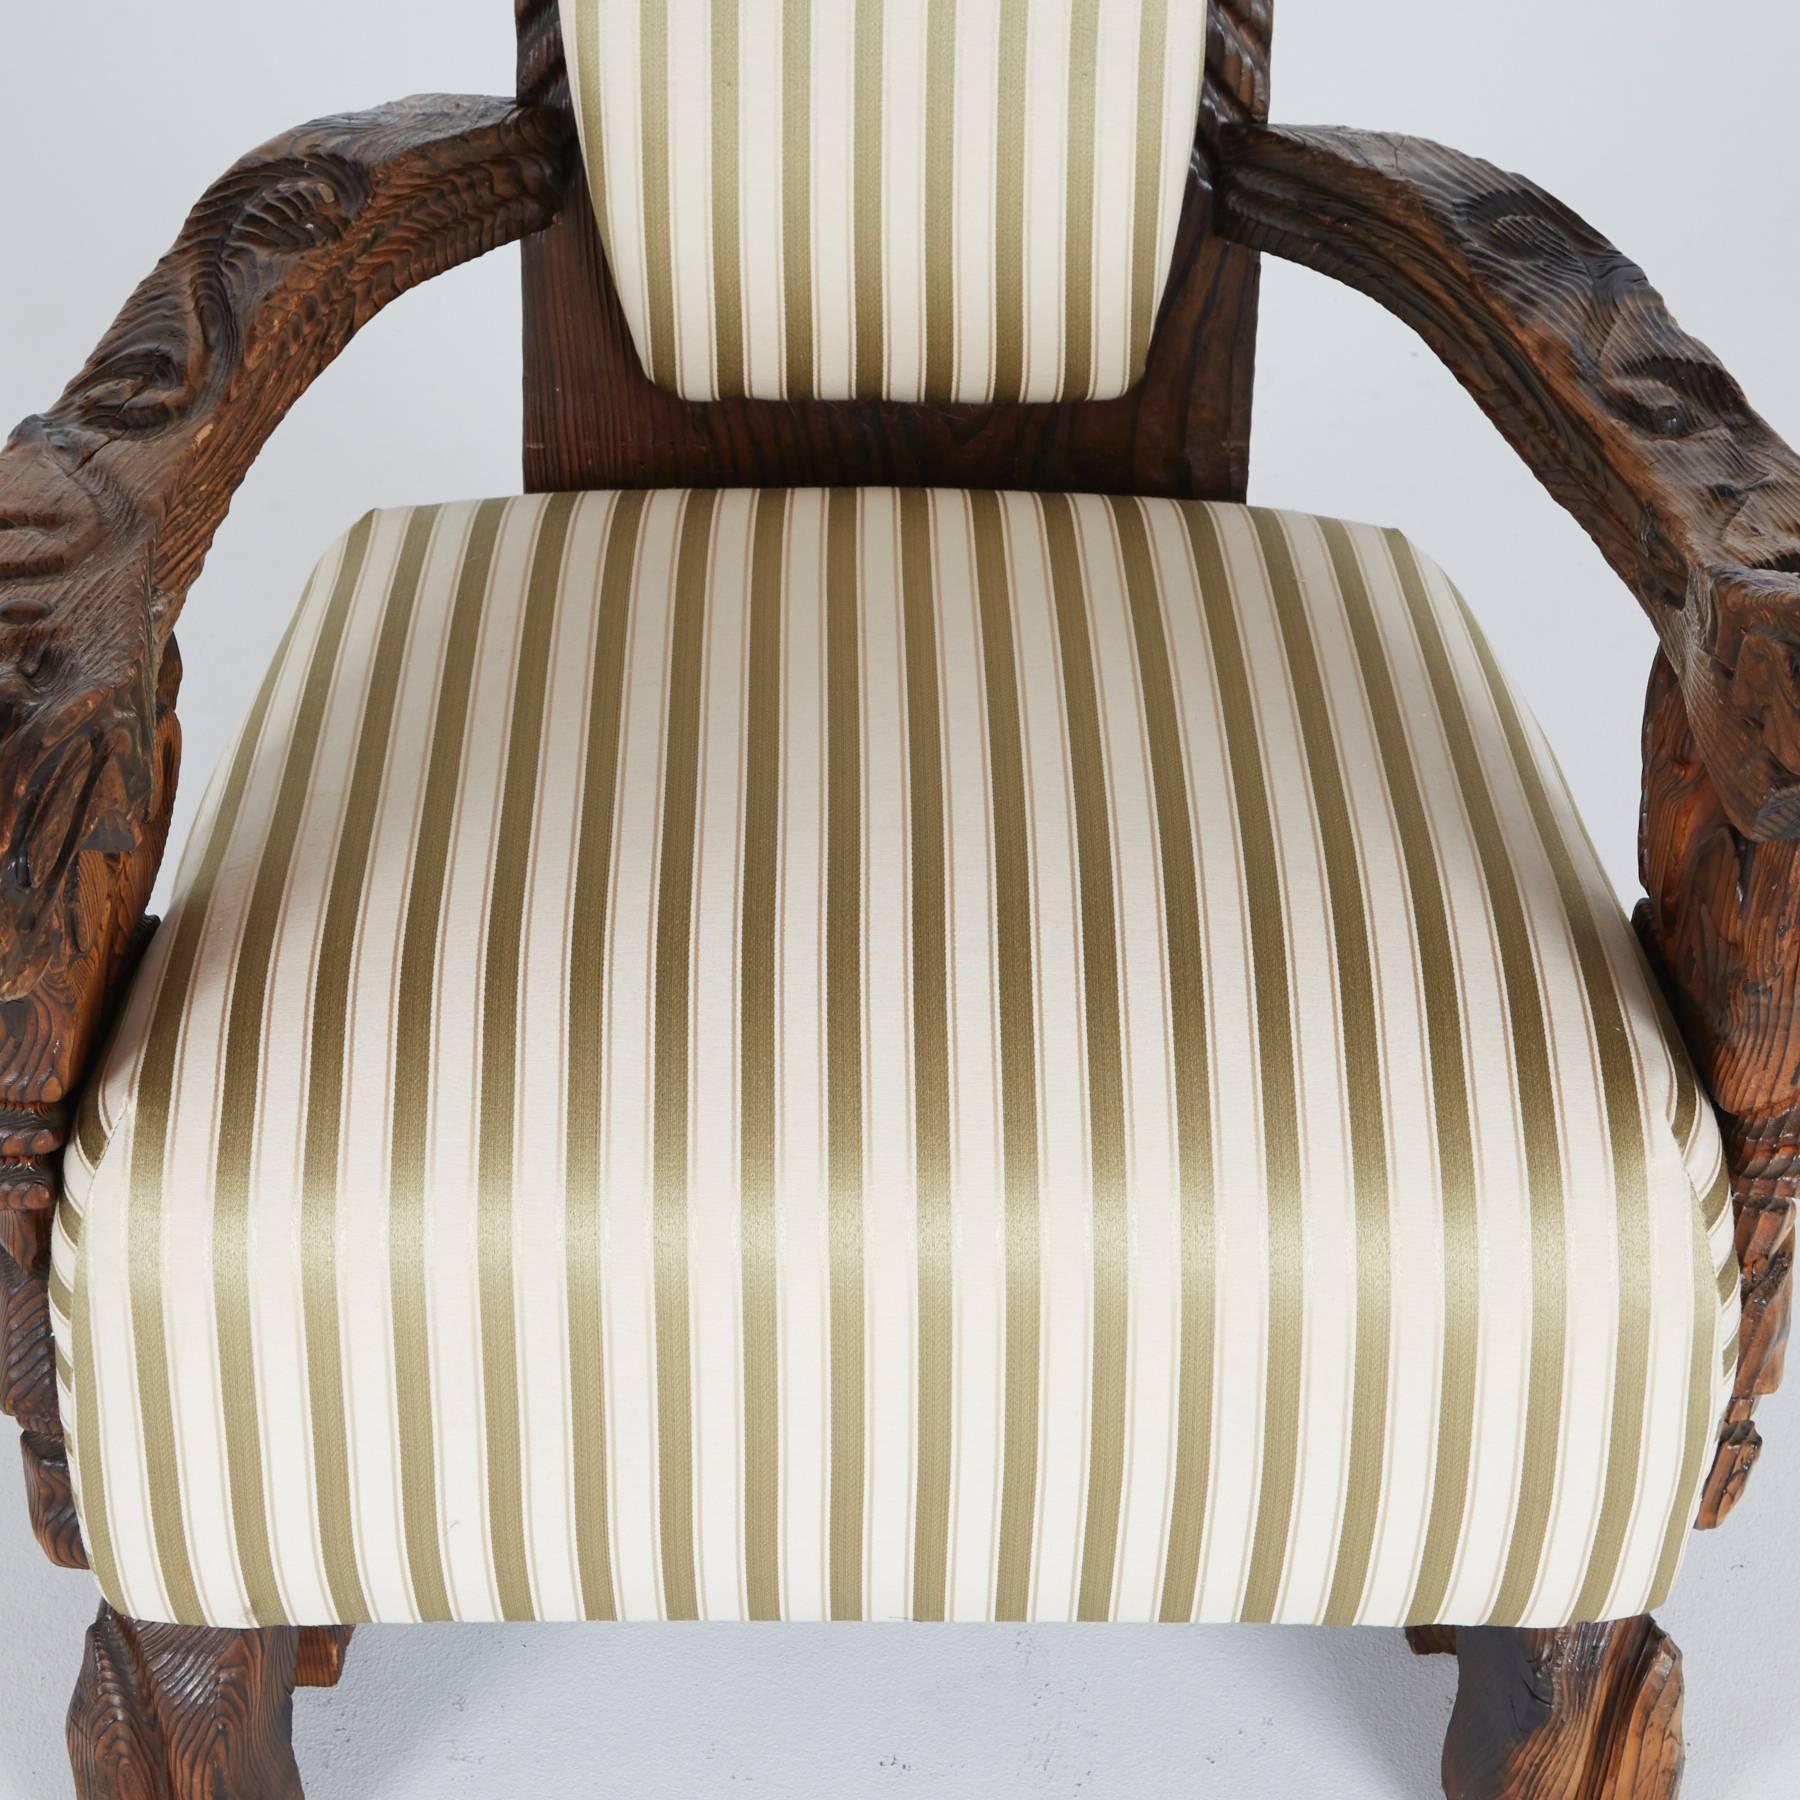 American Ornate Tiki Throne Chair by William Westenhaver for WITCO, 1950s